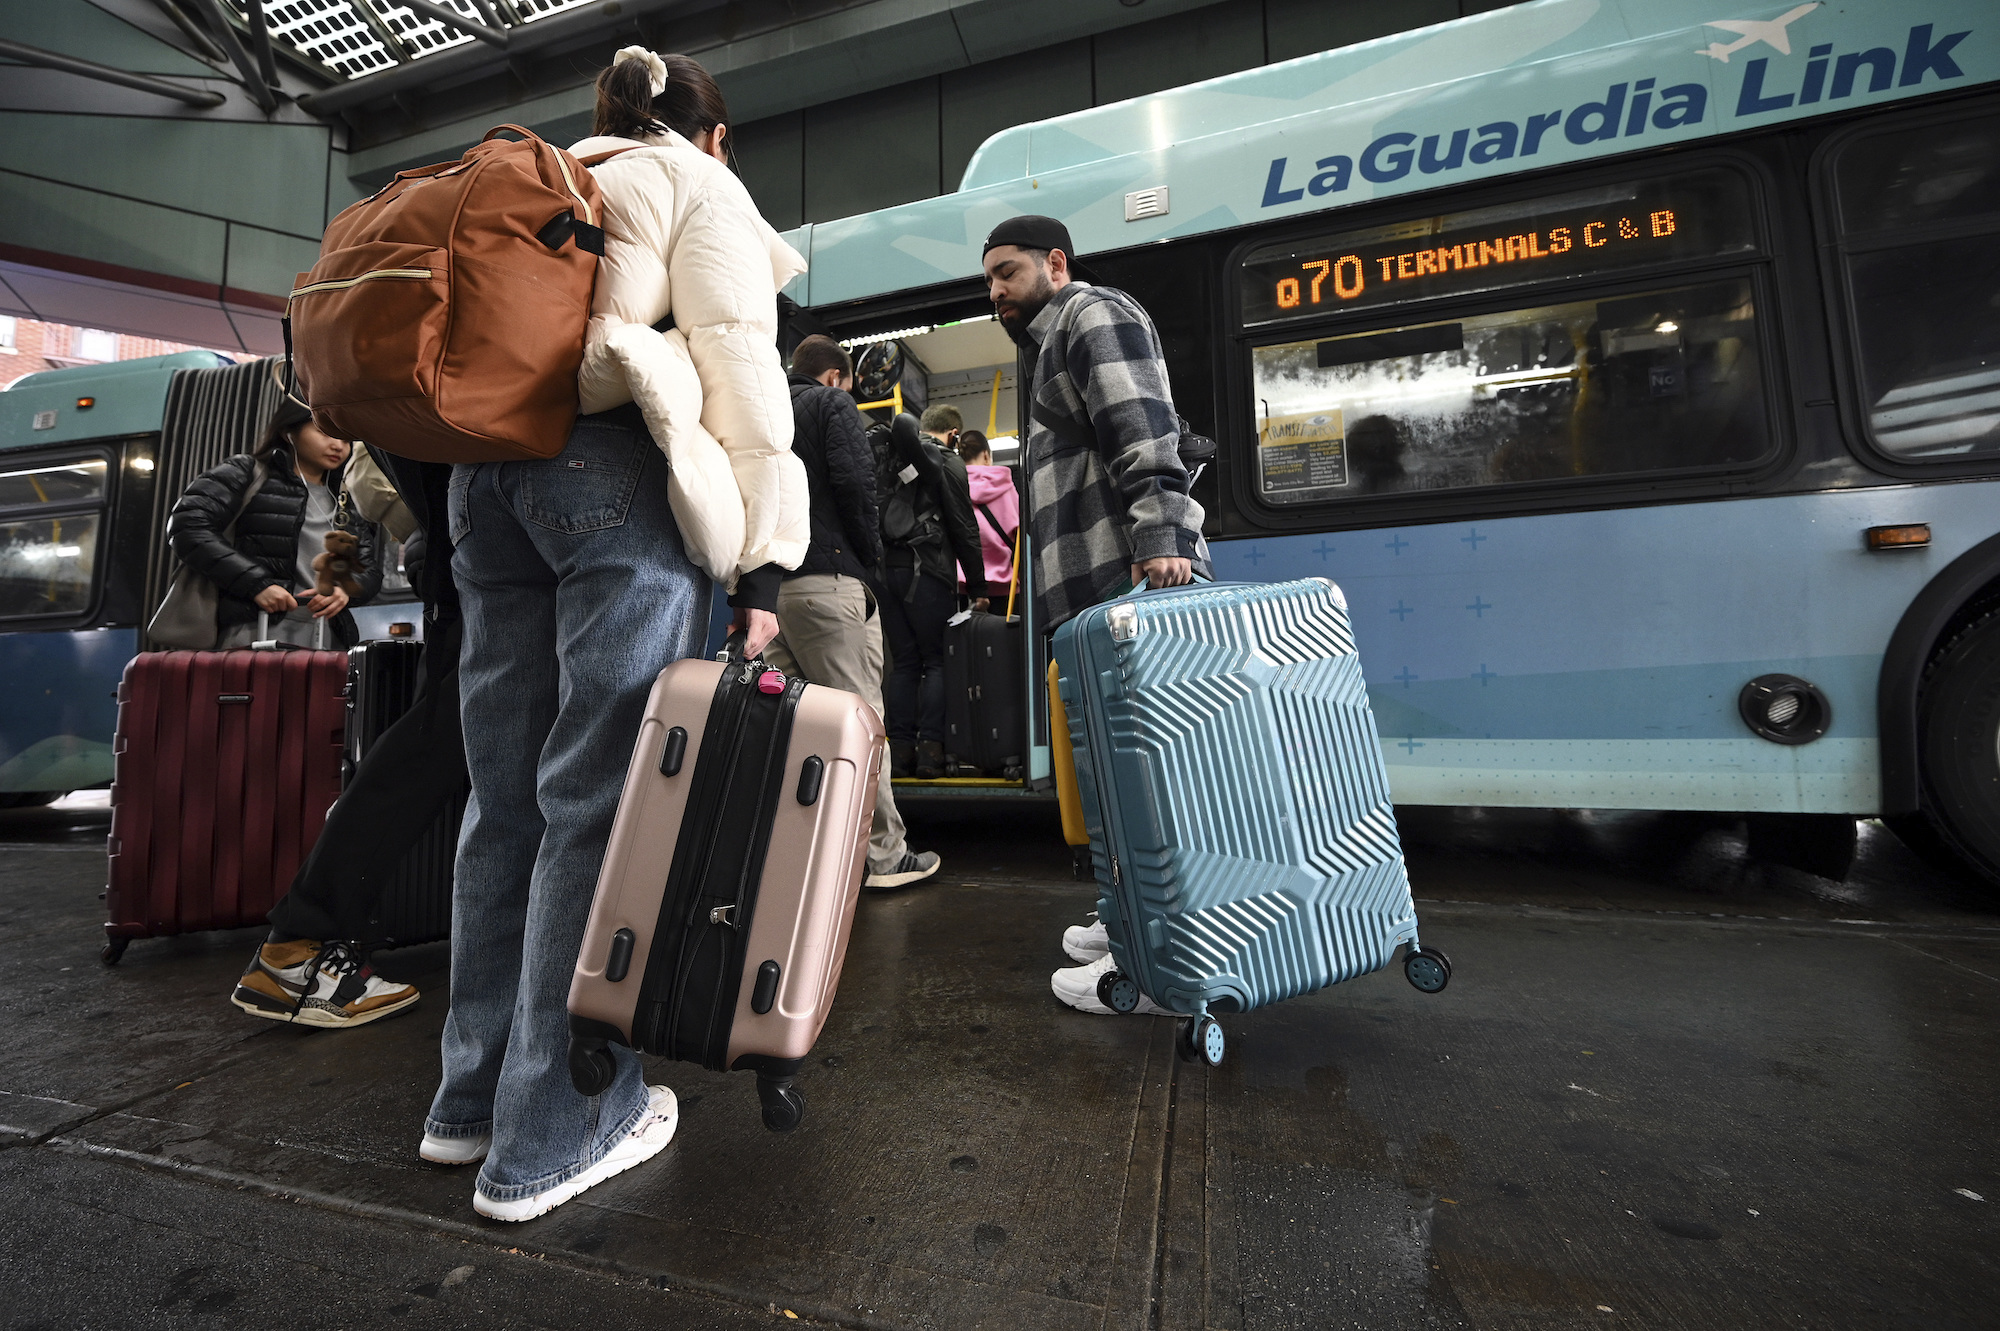 Travelers board a bus to LaGuardia Airport in New York City on Wednedsay.